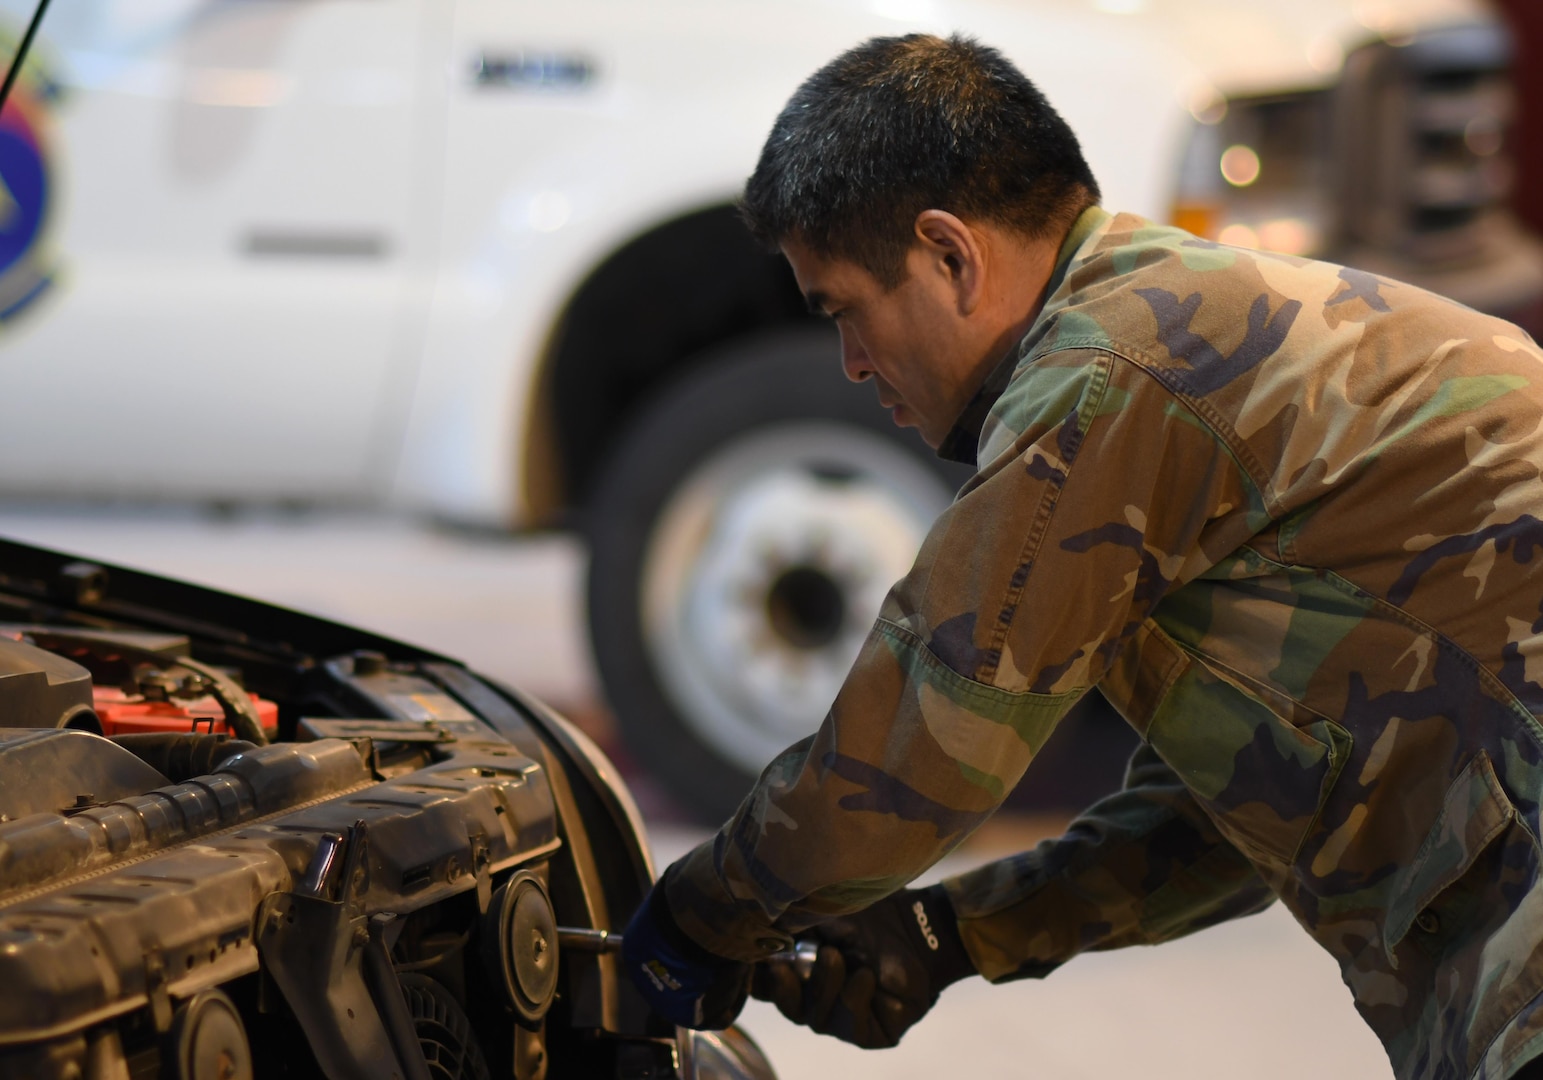 Yi Si-chun, 51st Logistics Readiness Squadron technician, secures a headlight in place at the Vehicle Maintenance Shop on Osan Air Base, Republic of Korea, March 22, 2017. With just over 100 members, Vehicle Maintenance cares for roughly 1,300 vehicles, providing everything from oil changes to engine rebuilds.  (U.S. Air Force photo by Staff Sgt. Alex Fox Echols III/Released)